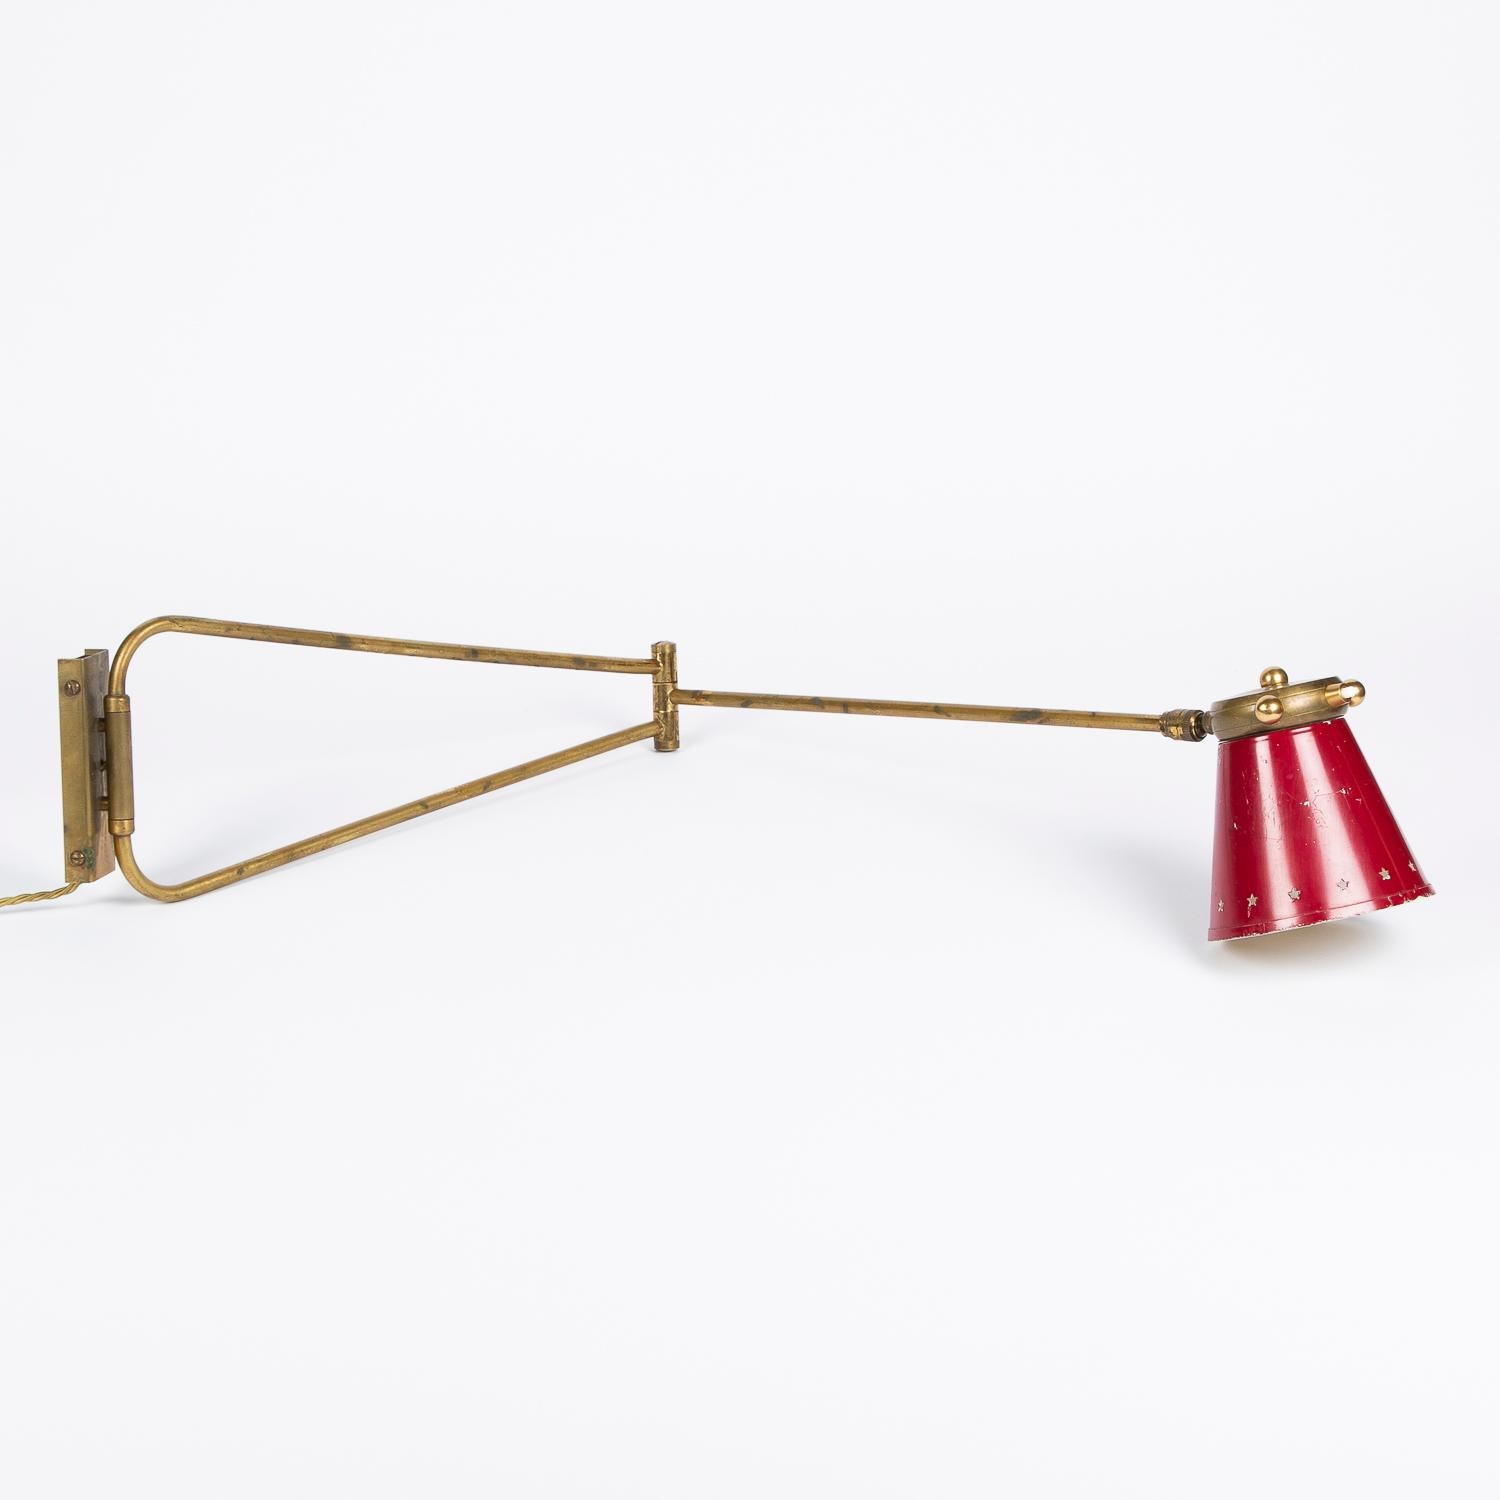 A 1950s double swing arm wall lamp designed by René Mathieu for Maison Lunel.

Crimson red shade, with white interior, pierced with stars. Brass articulating arm, hinge, back-plate and cap. Some losses to the crimson red paint work.

Projection